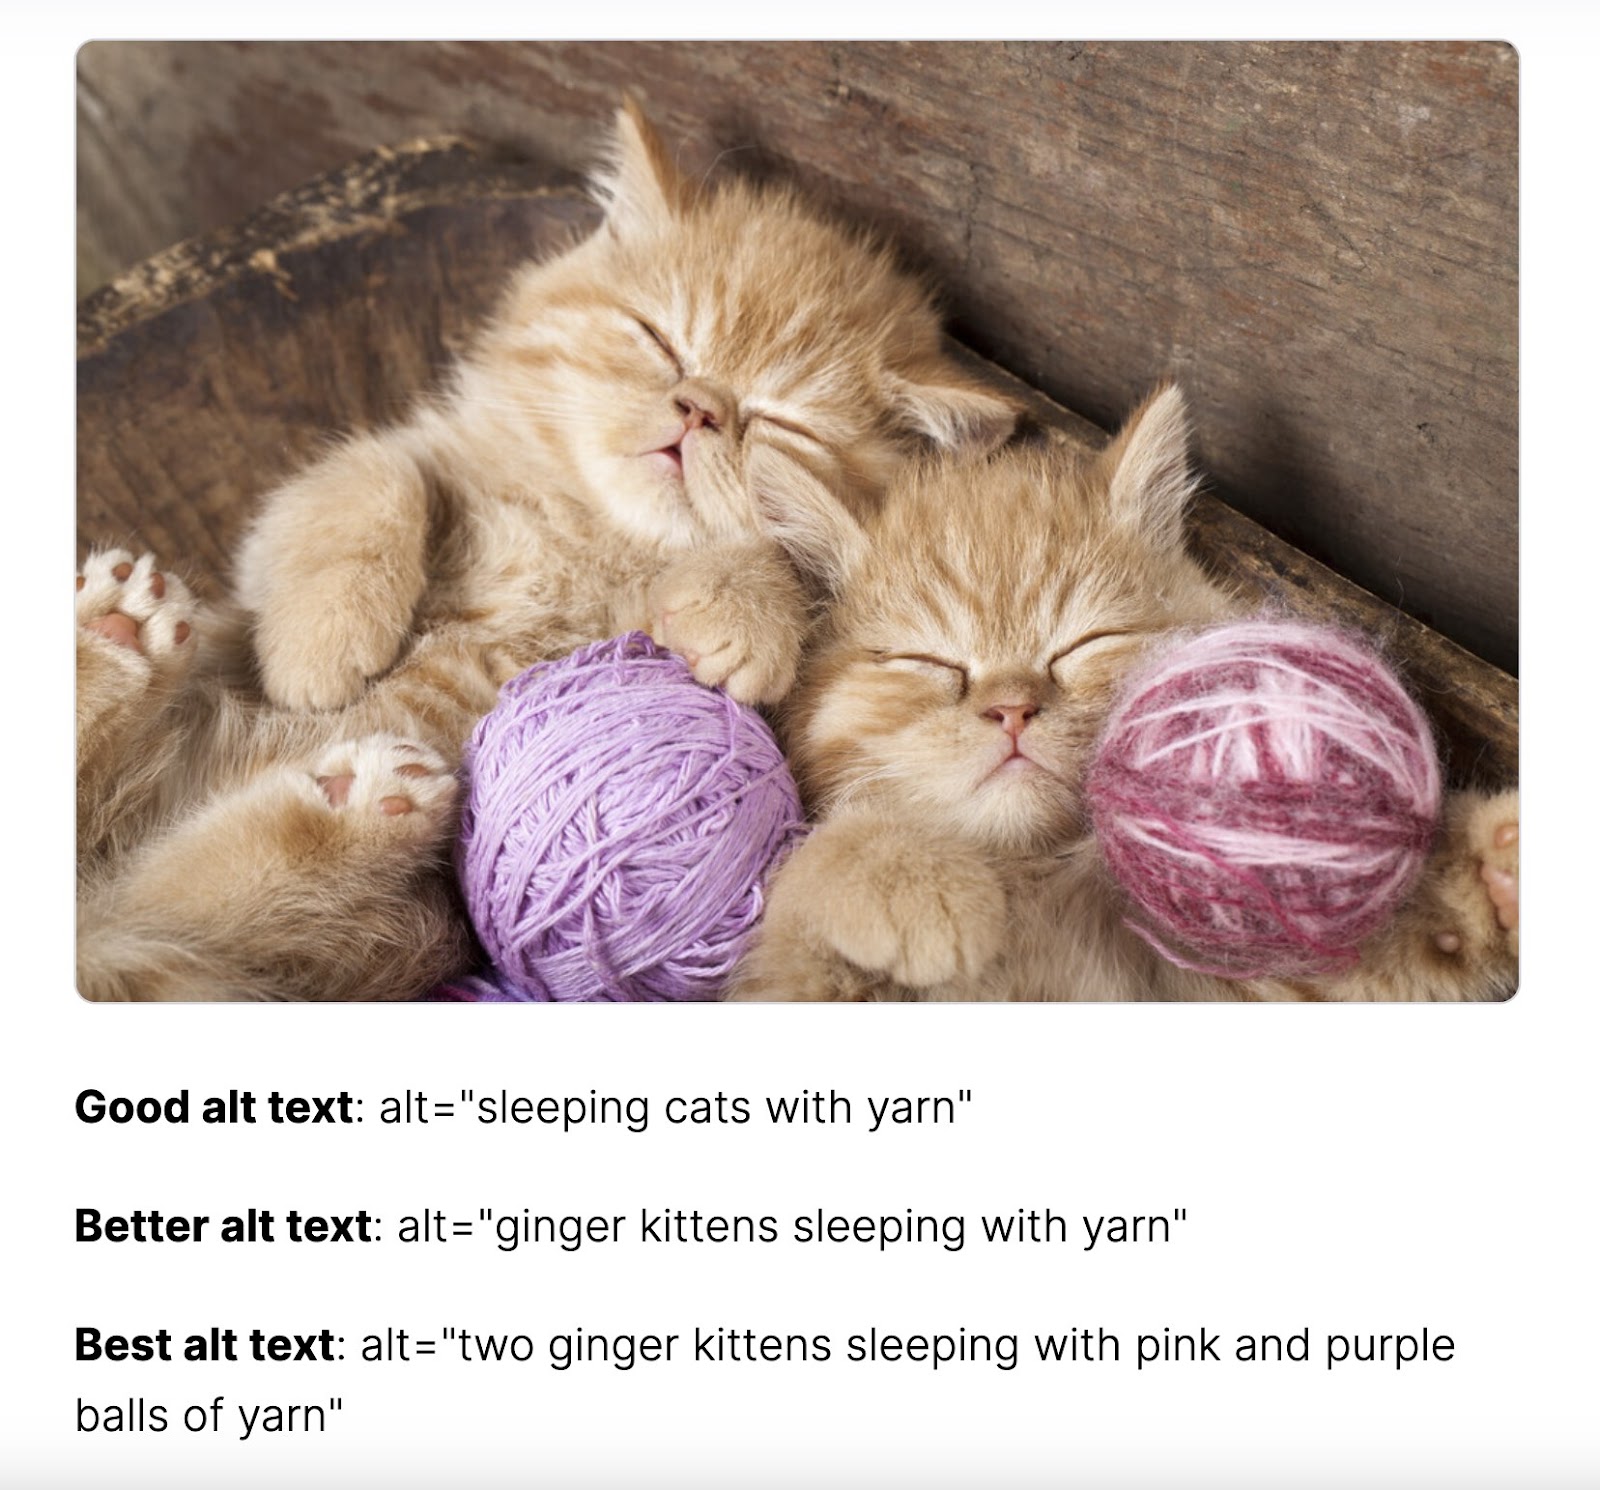 An image of the two ginger kittens, with an explanation of what the best alt text would be